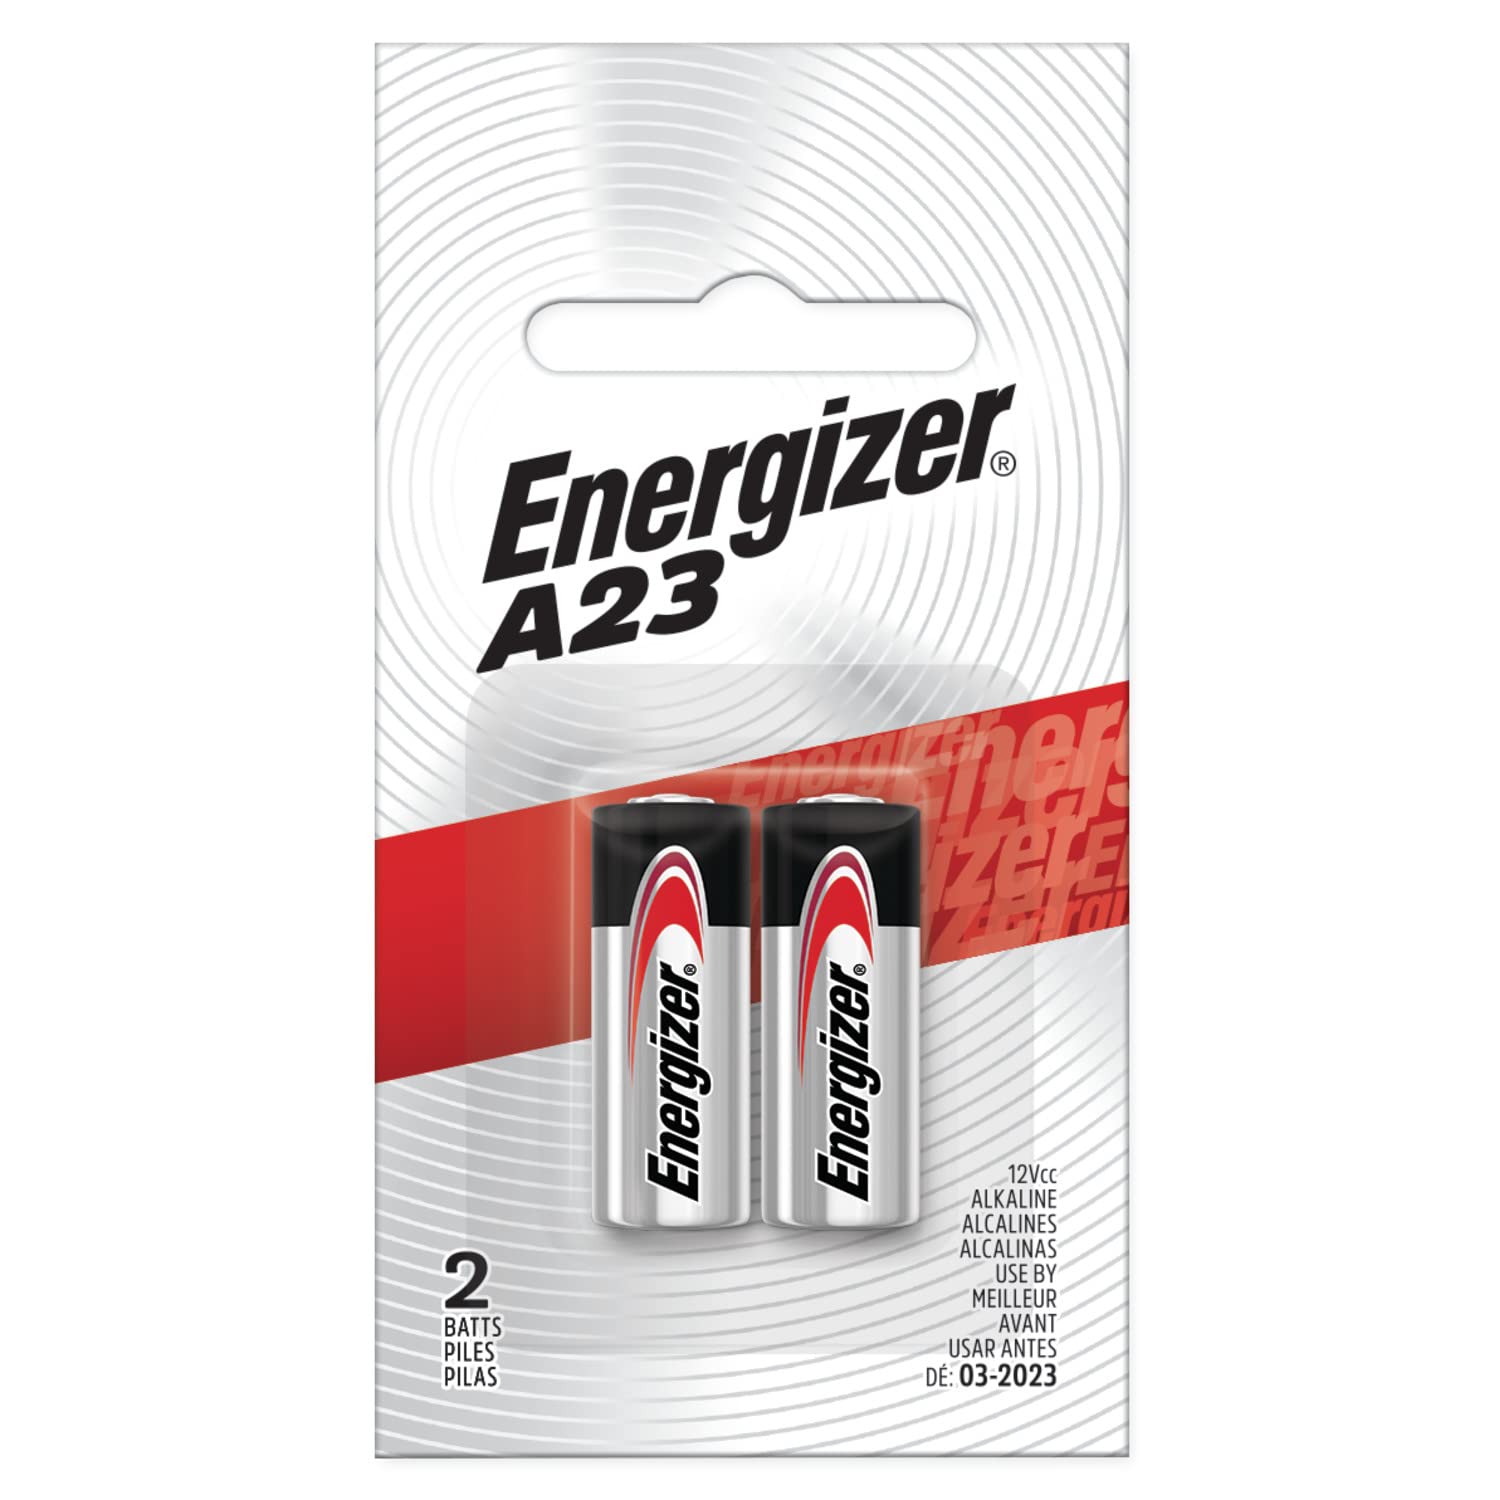 Energizer Alkaline Batteries A23 (2 Battery Count) - Packaging May Vary